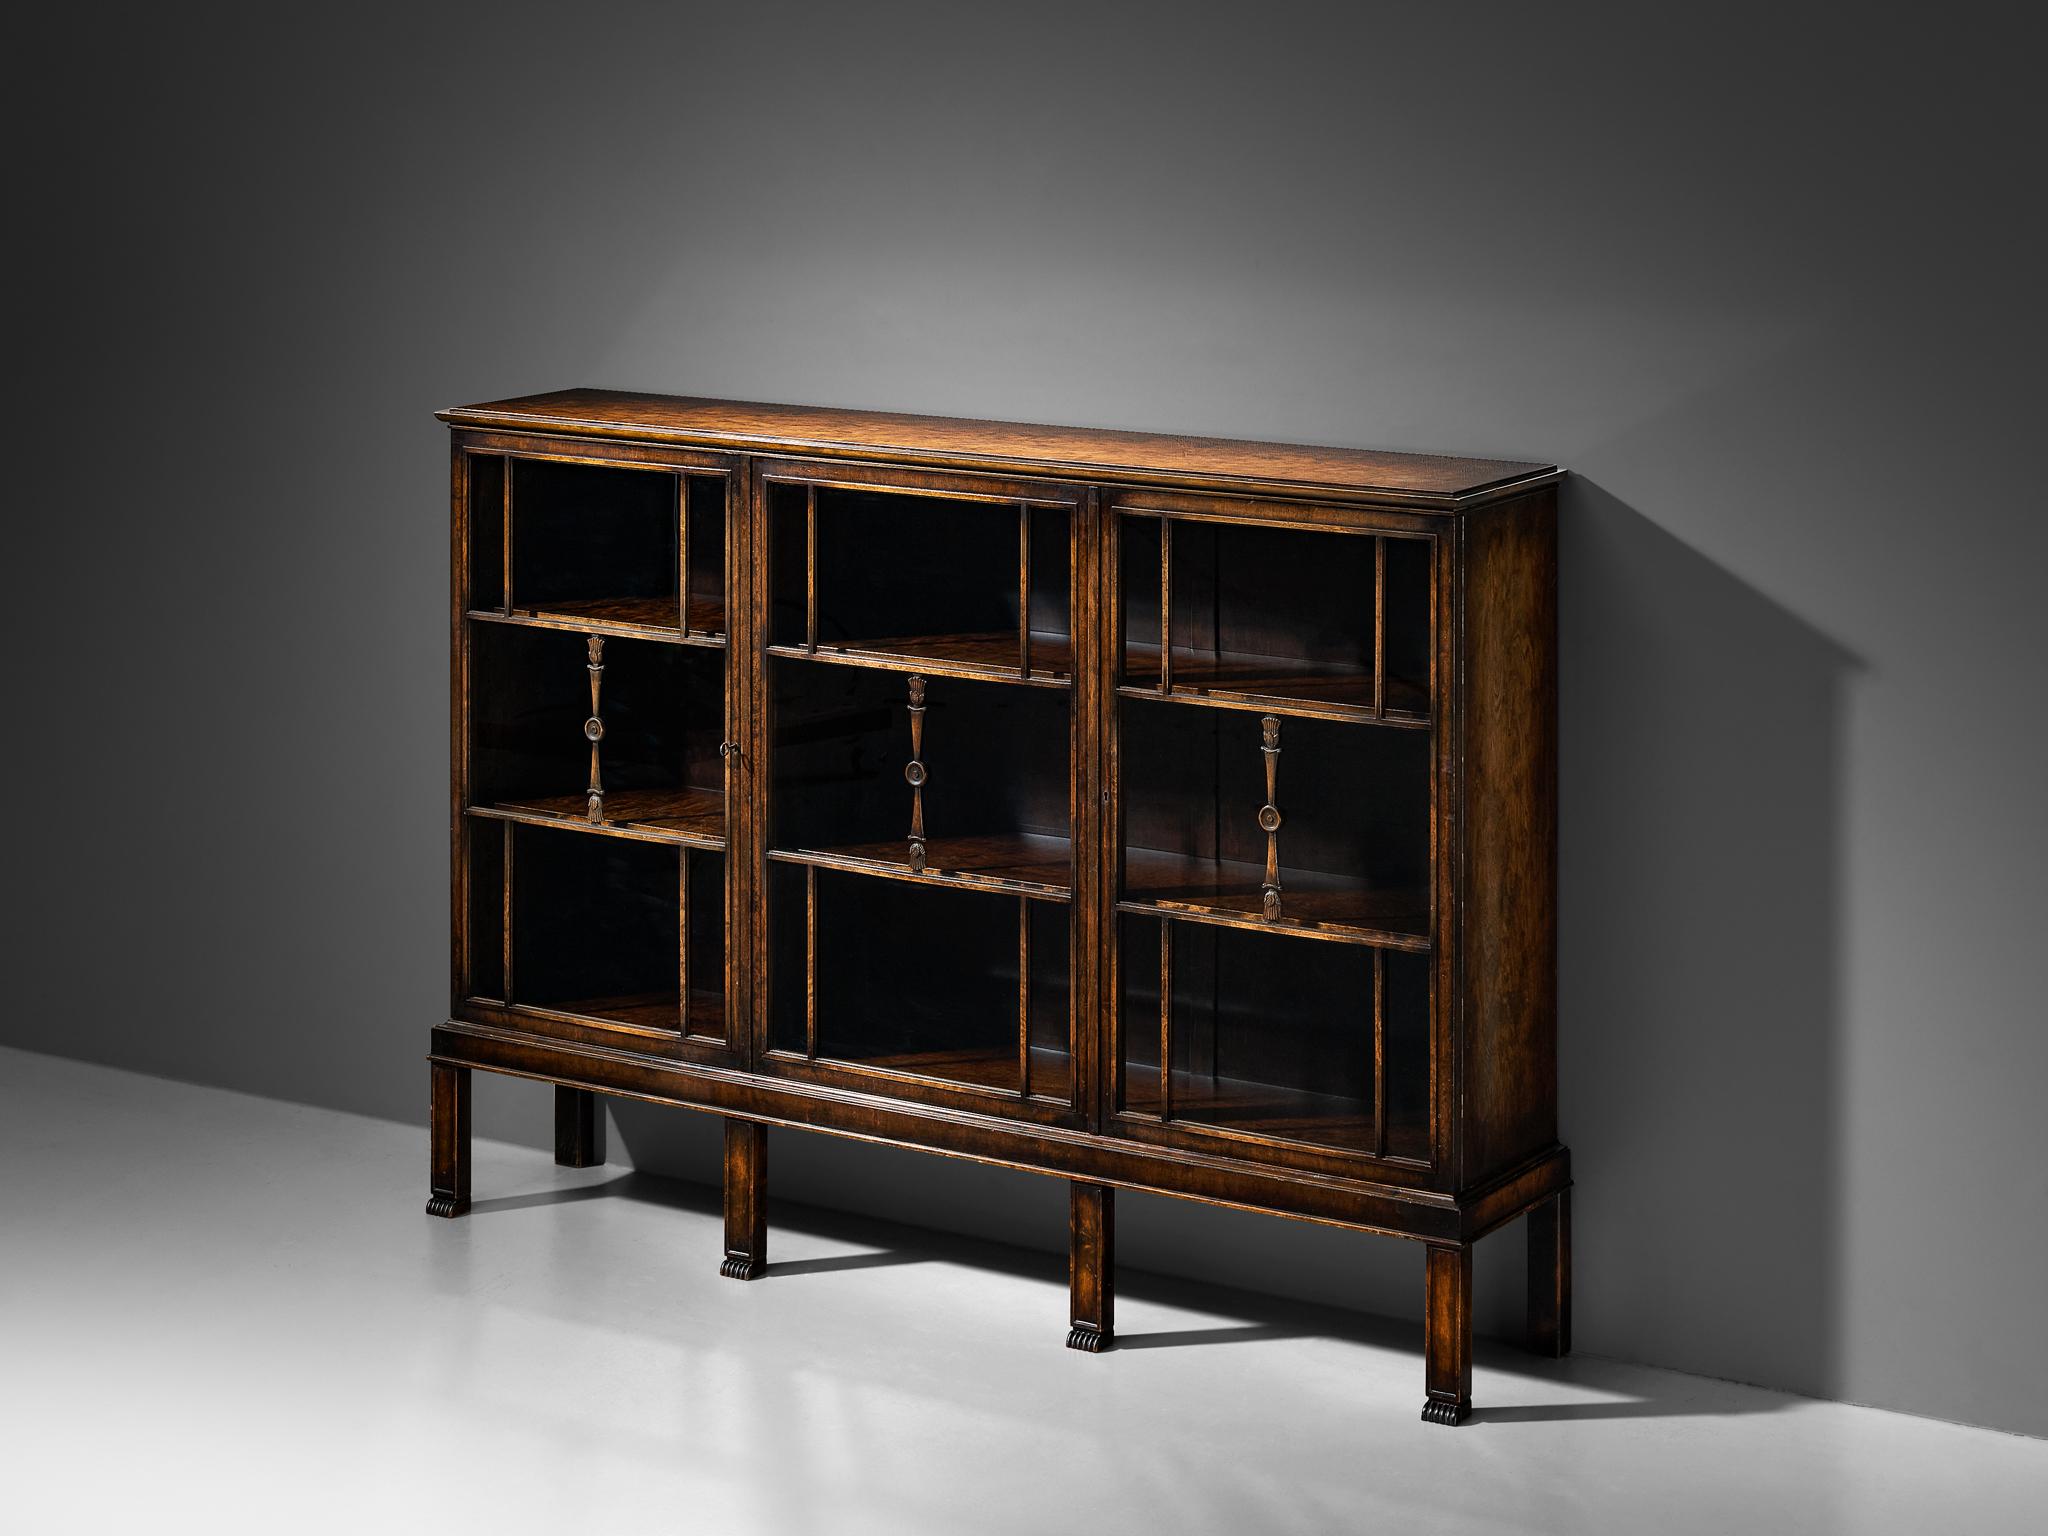 Axel Einar Hjorth for Nordiska Kompaniet, bookcase, stained birch, glass, Sweden, 1927

In 1927, Axel Einar Hjorth unveiled a masterpiece for Nordiska Kompaniet – a bookcase that embodies the epitome of Swedish design. The bookcase is crafted from